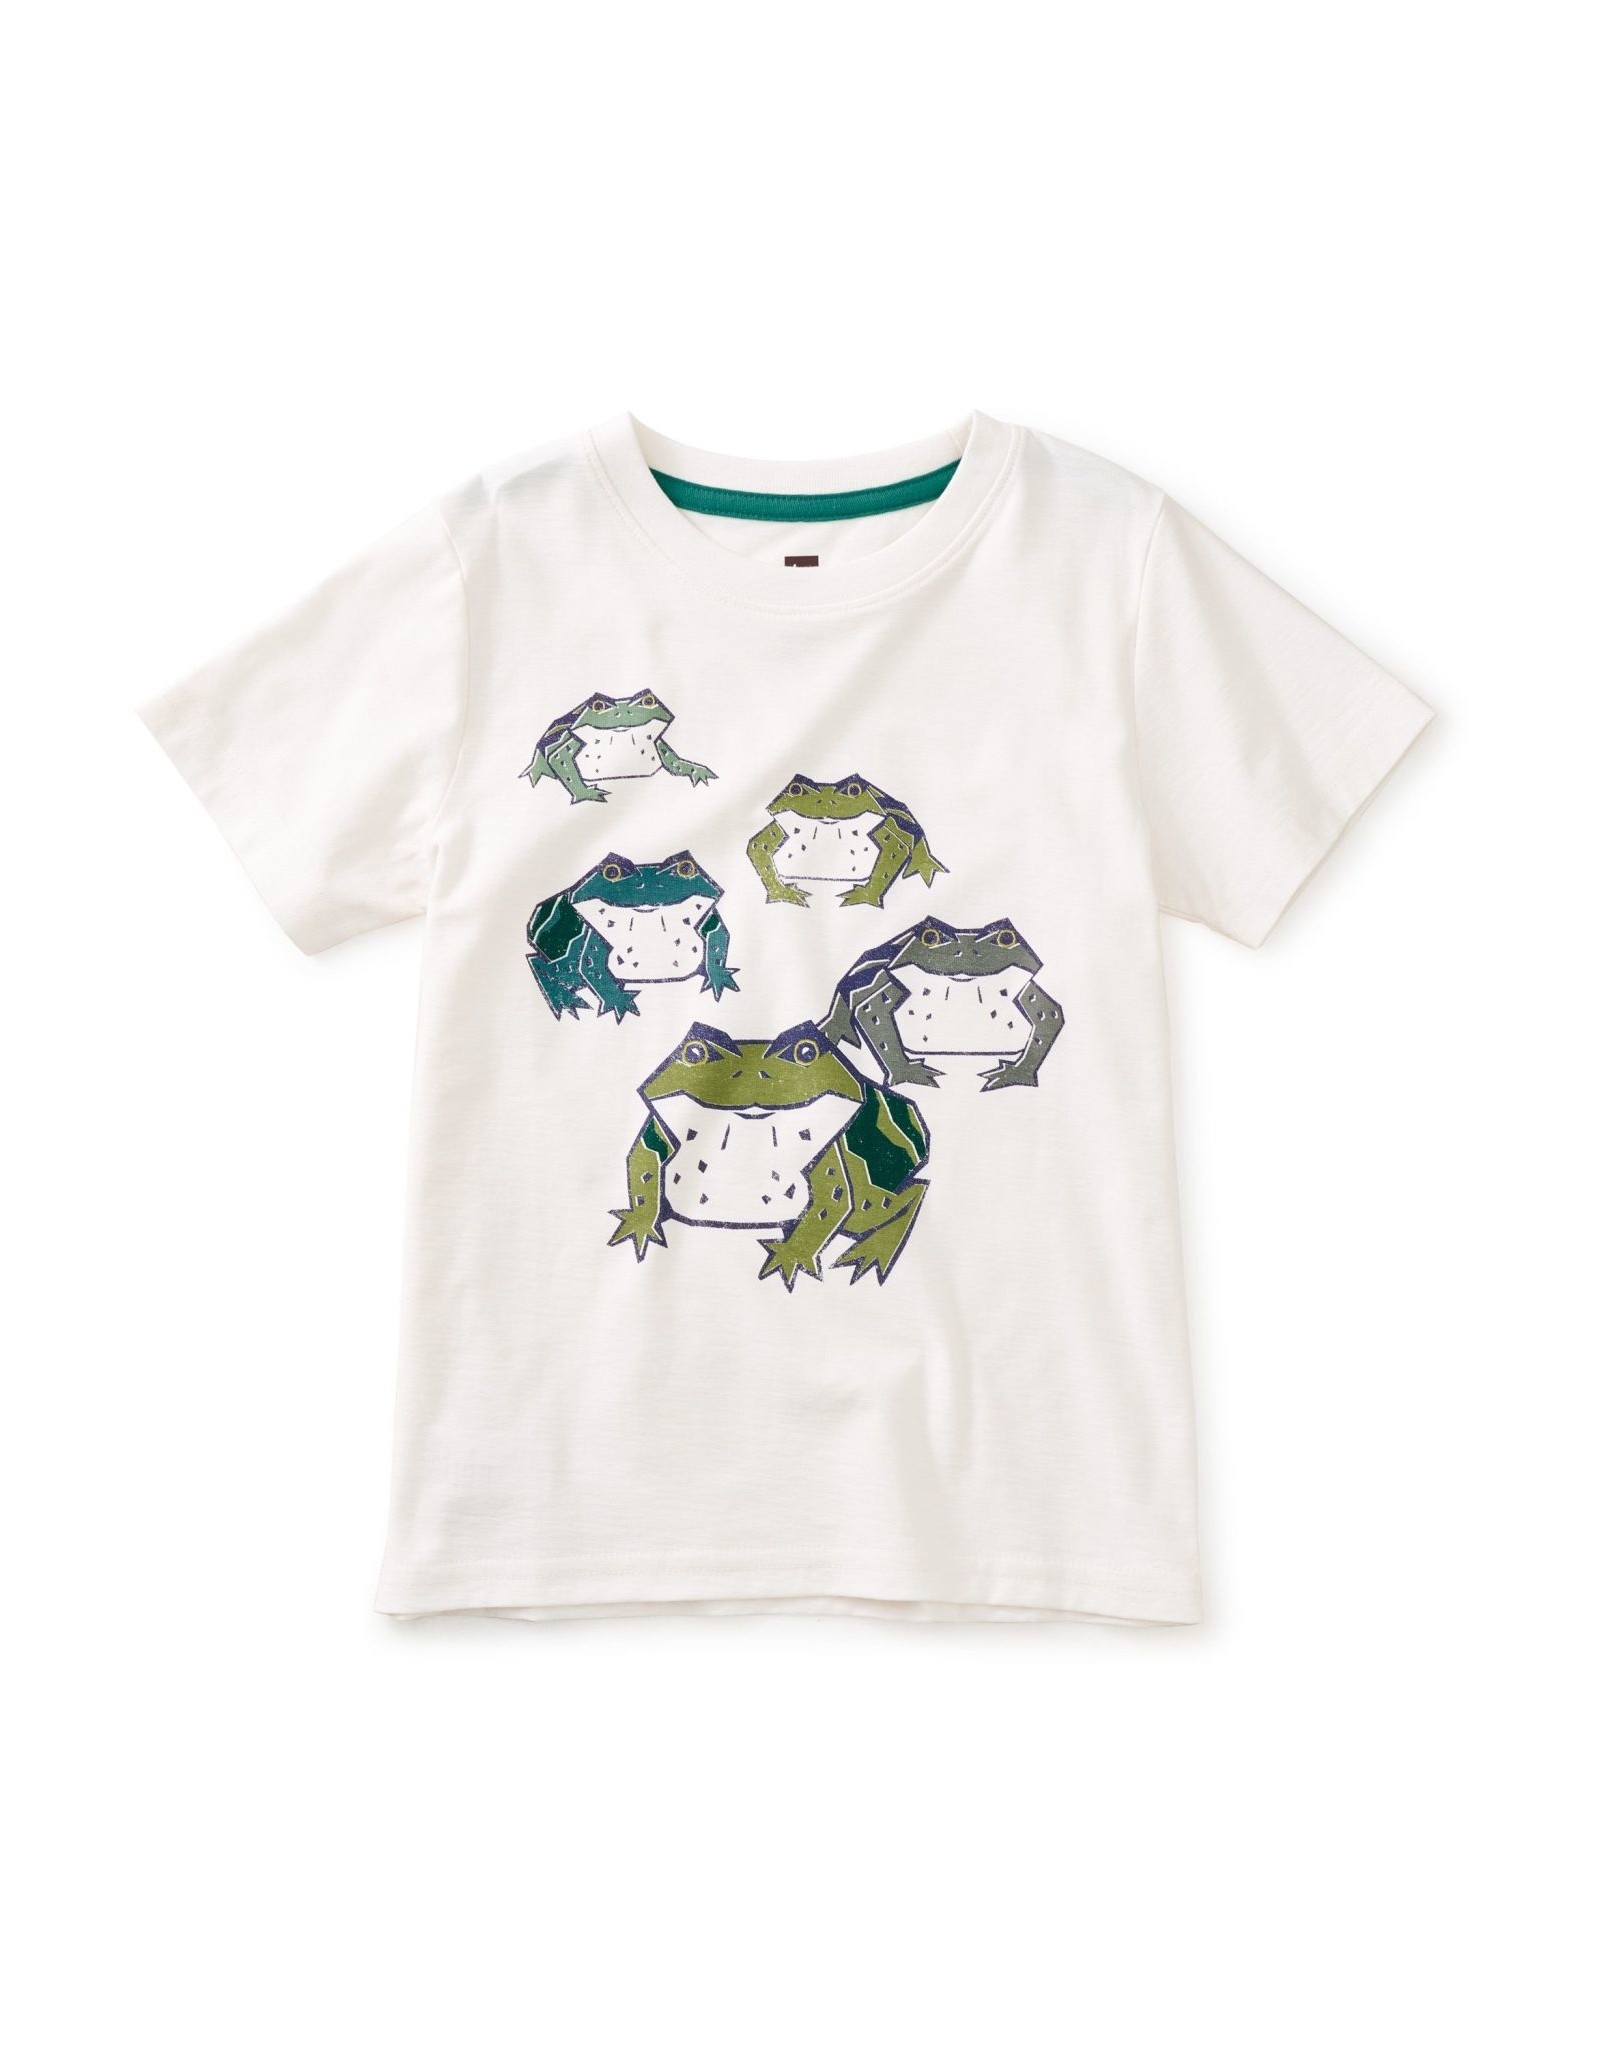 Tea Collection Toadally Cool Graphic Tee